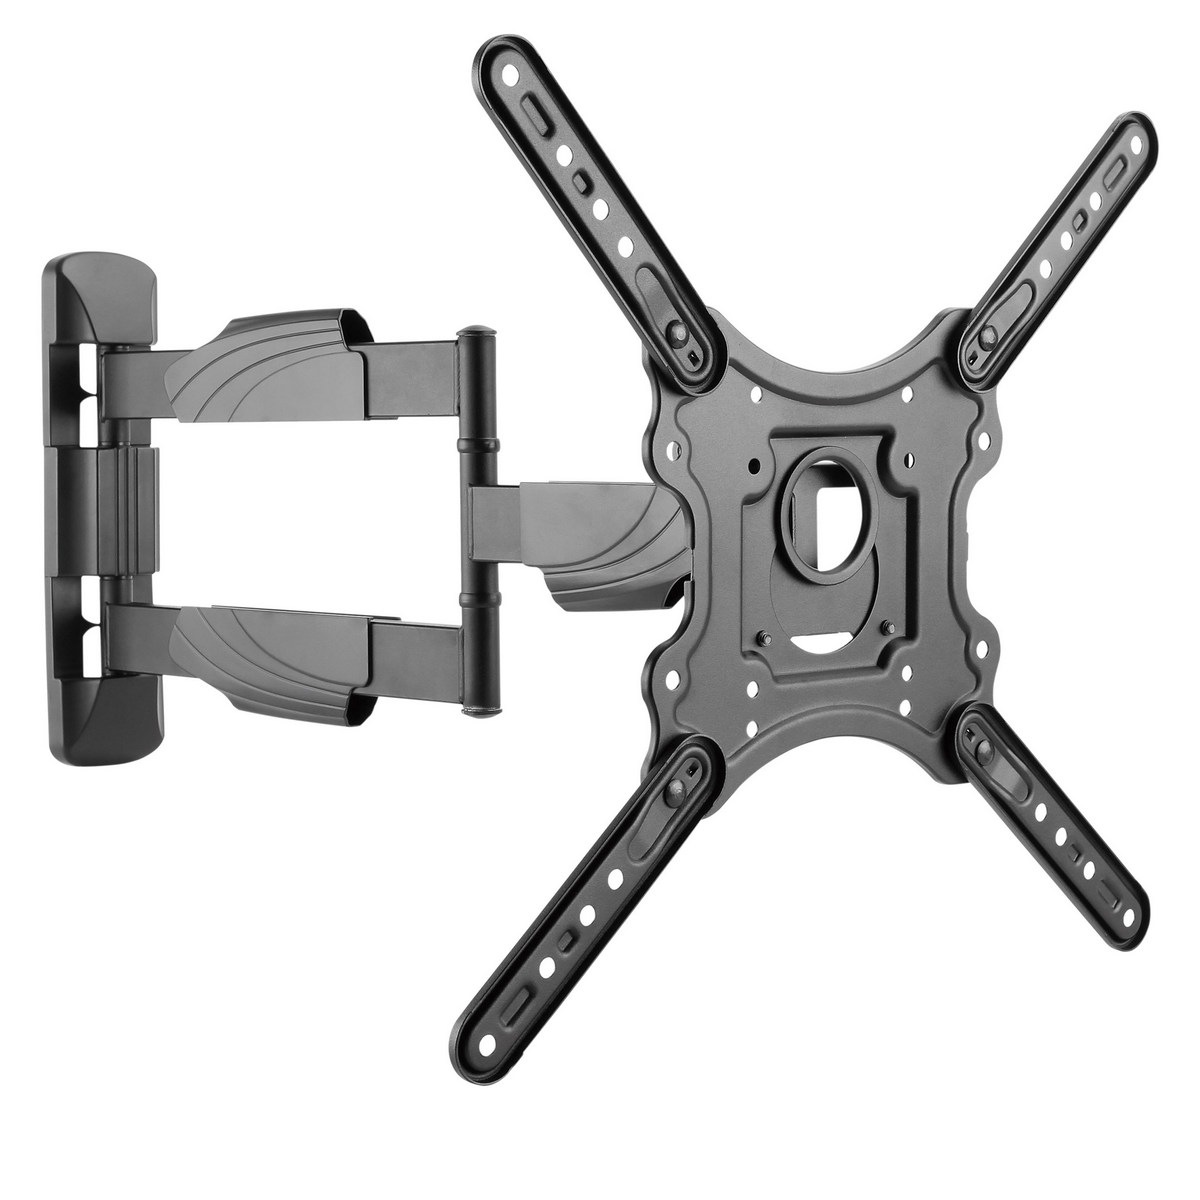 Corliving Mpm-804-a Full Motion Flat Panel Wall Mount For Tvs Up To 55"